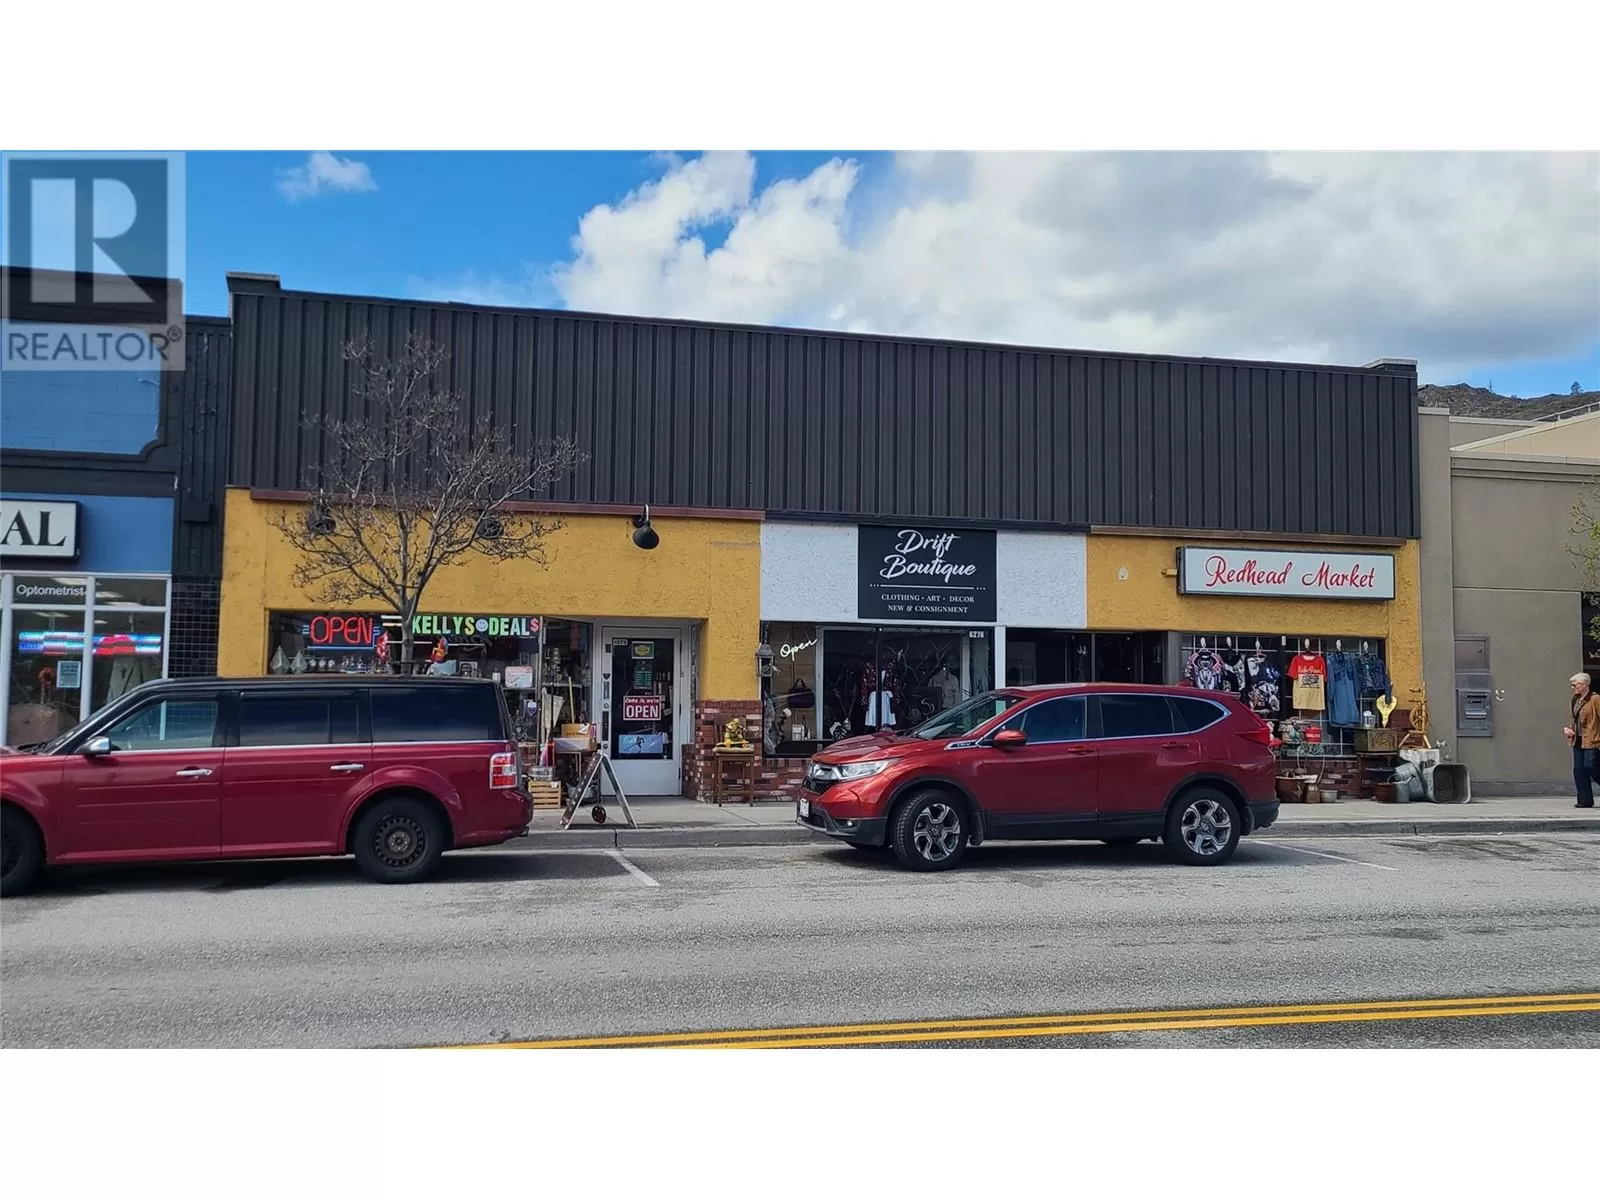 Retail for rent: 6272 Main Street, Oliver, British Columbia V0H 1T0